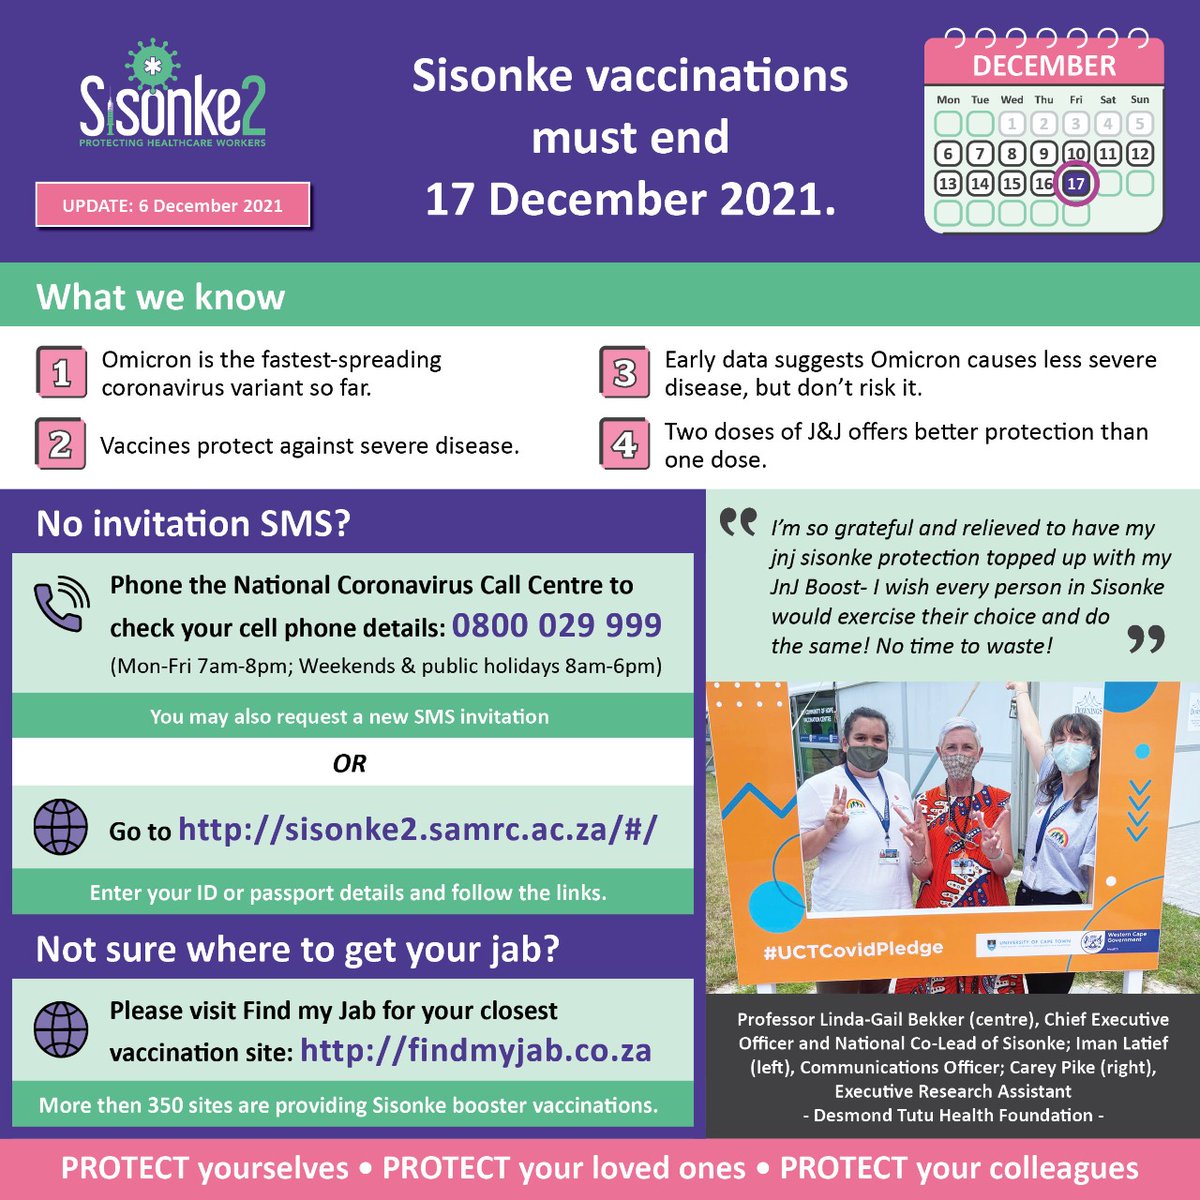 #Sisonke phase 2 - Johnson and Johnson booster for #Healthcareworkers wraps up in just 8 days. For goodness sake, all HCWs please go immediately to your nearest site if you haven't had your booster #NeverTooLateToVaccinate #GetVaccinatedNow #VaccinesWork